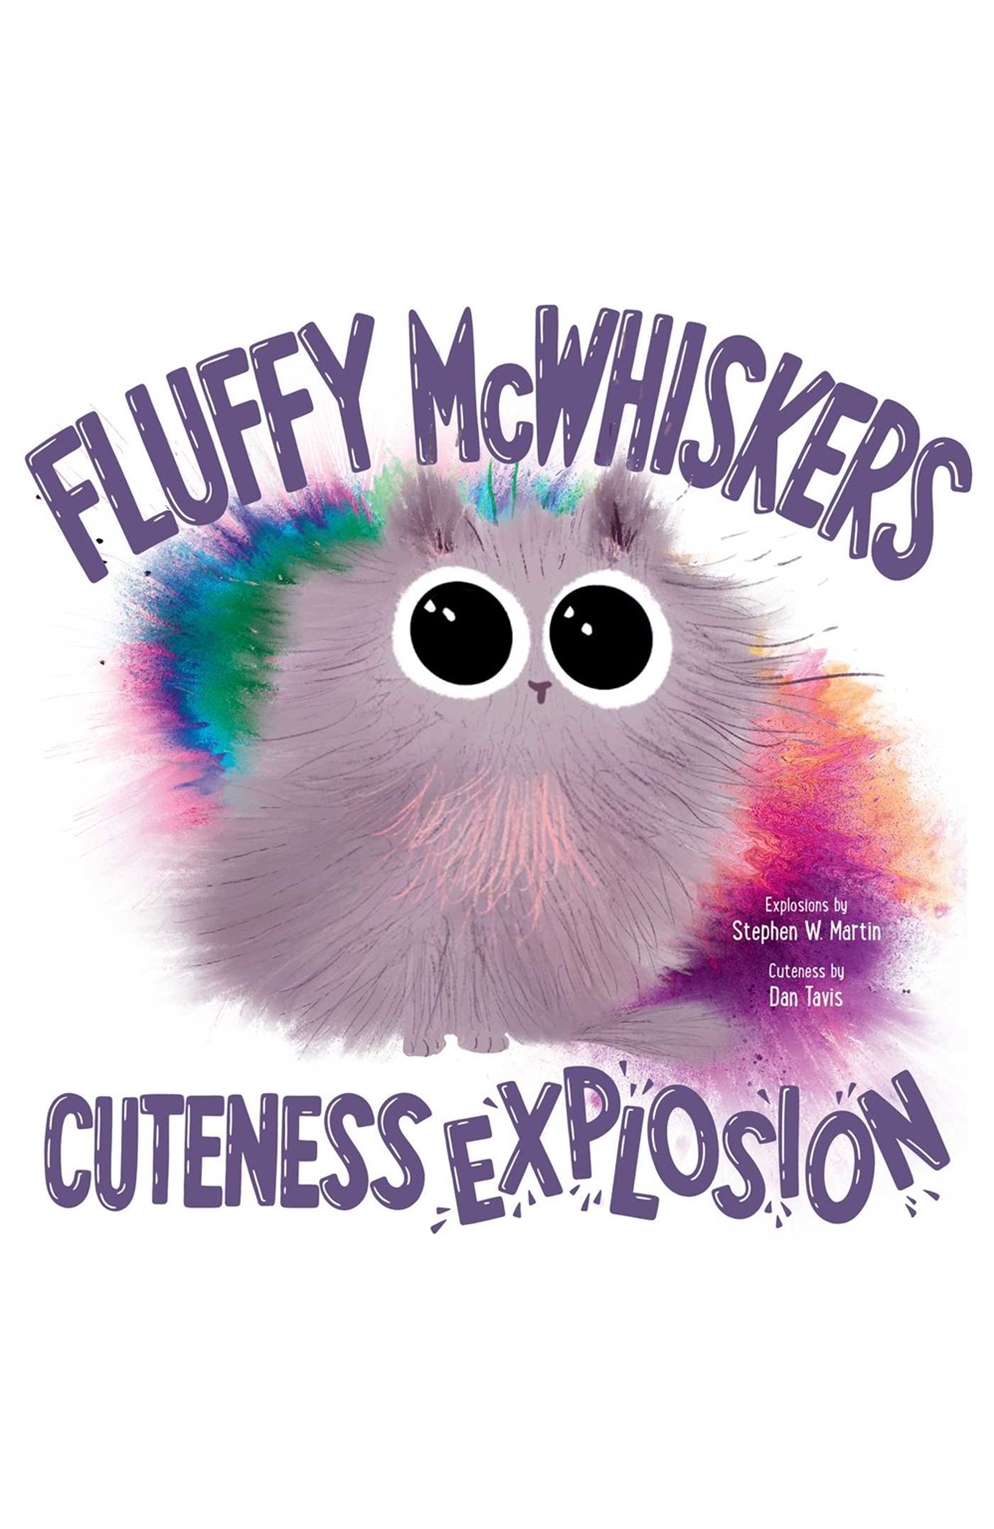 Fluffy Mcwhiskers Cuteness Explosion